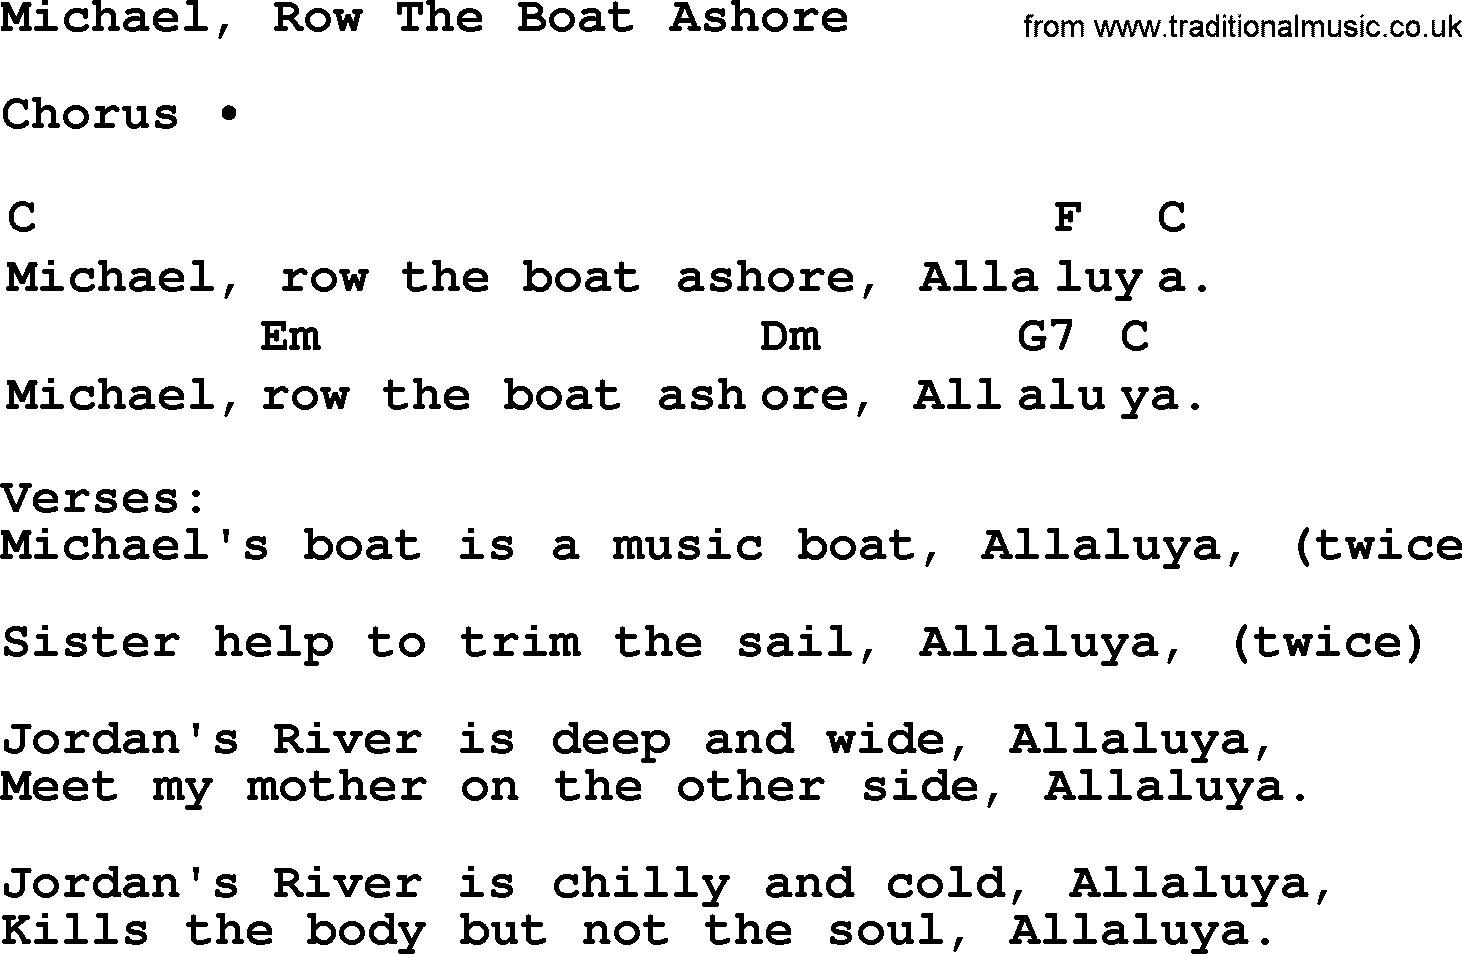 Top 1000 Most Popular Folk and Old-time Songs: Michael, Row The Boat Ashore, lyrics and chords